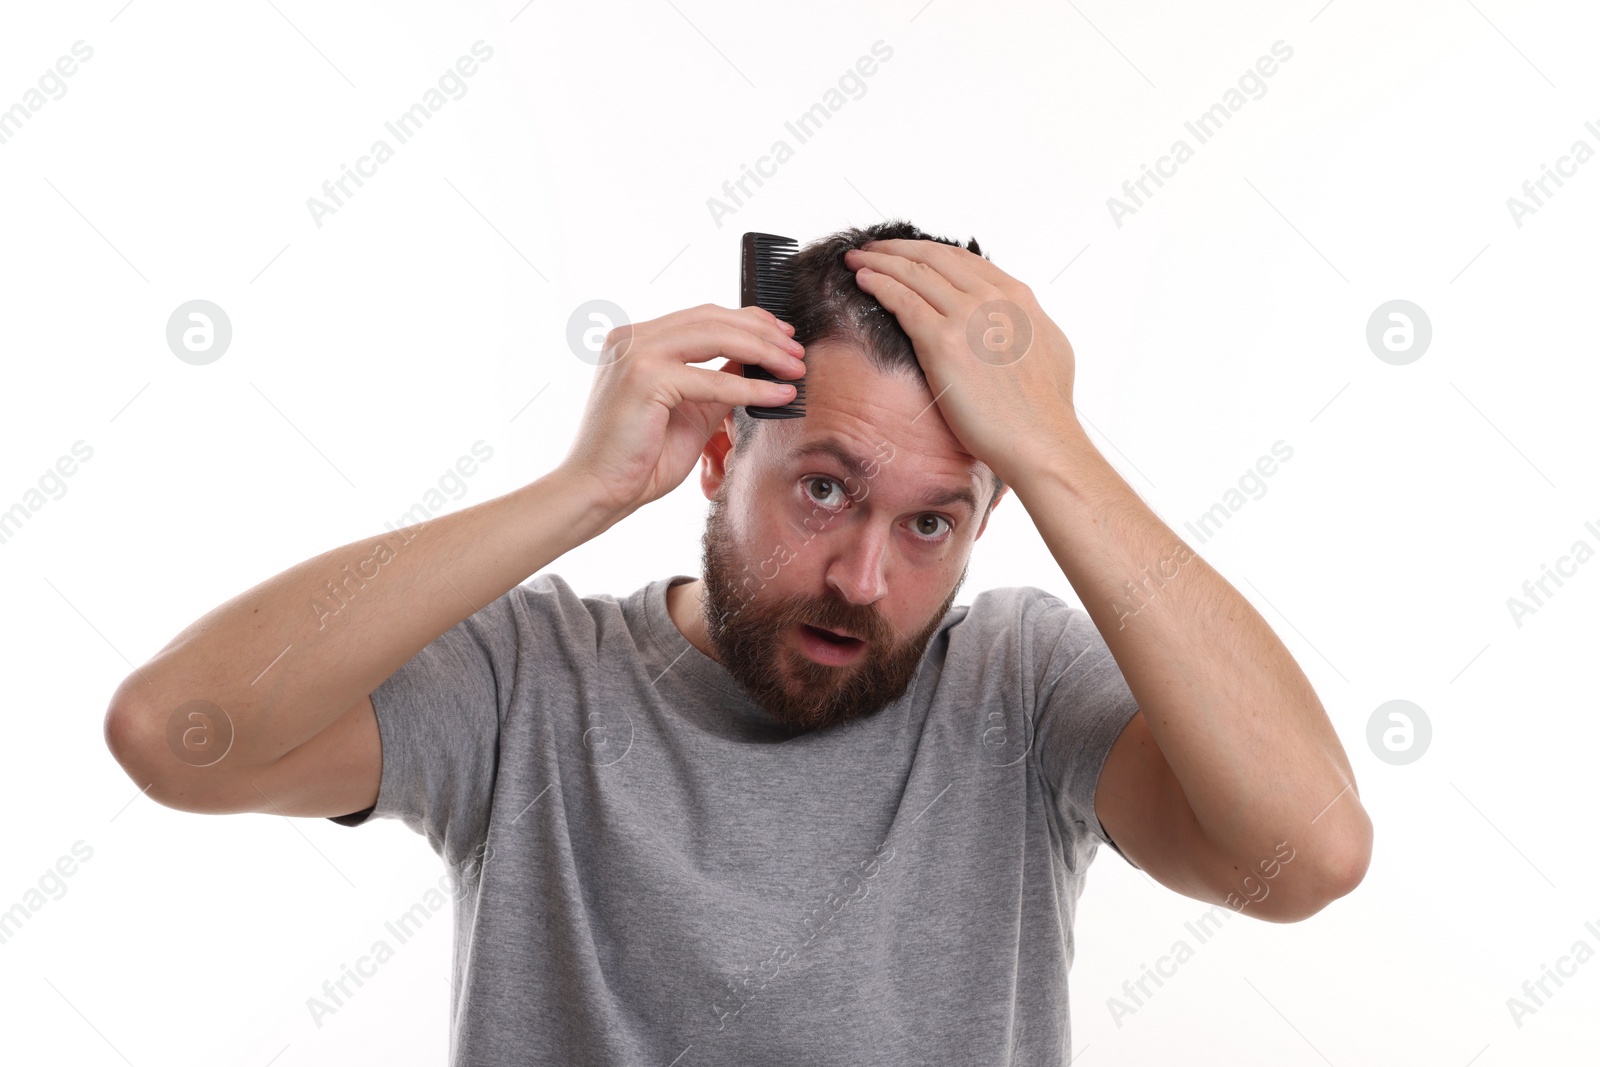 Photo of Dandruff problem. Man with comb examining his hair and scalp on white background